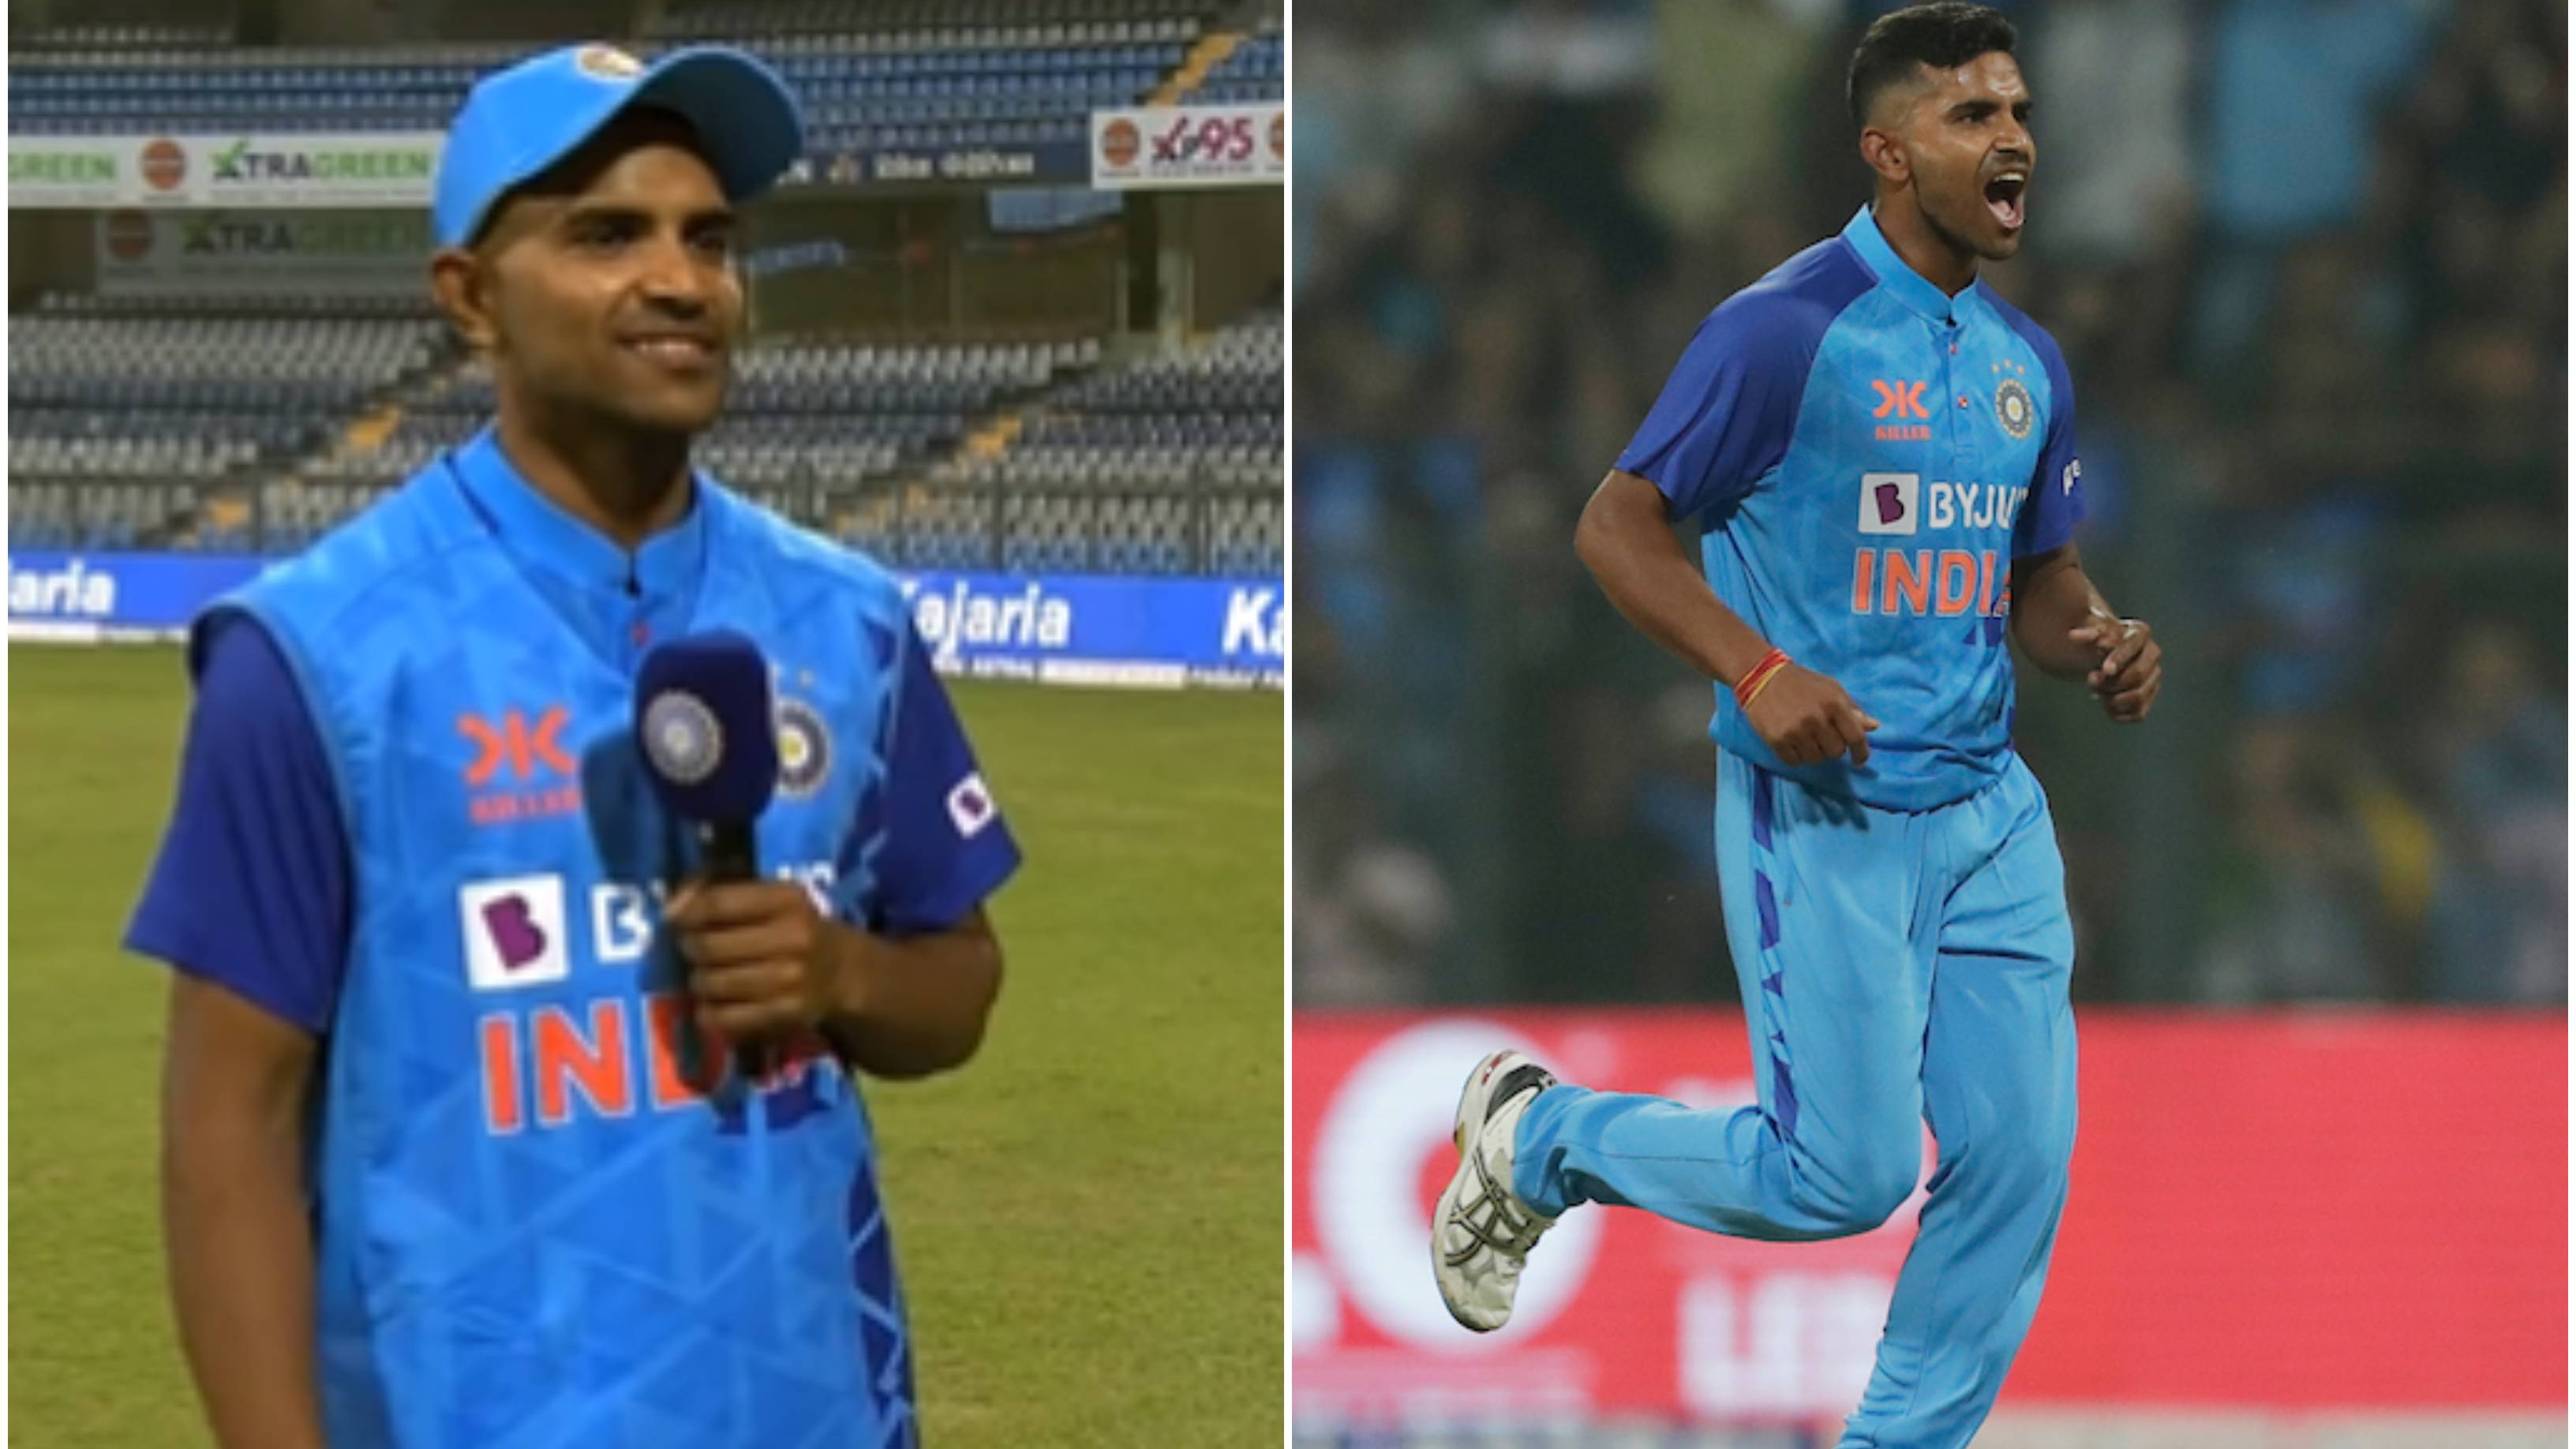 IND v SL 2023: WATCH – “My mindset is to get wickets,” says Shivam Mavi after his dream T20I debut for India